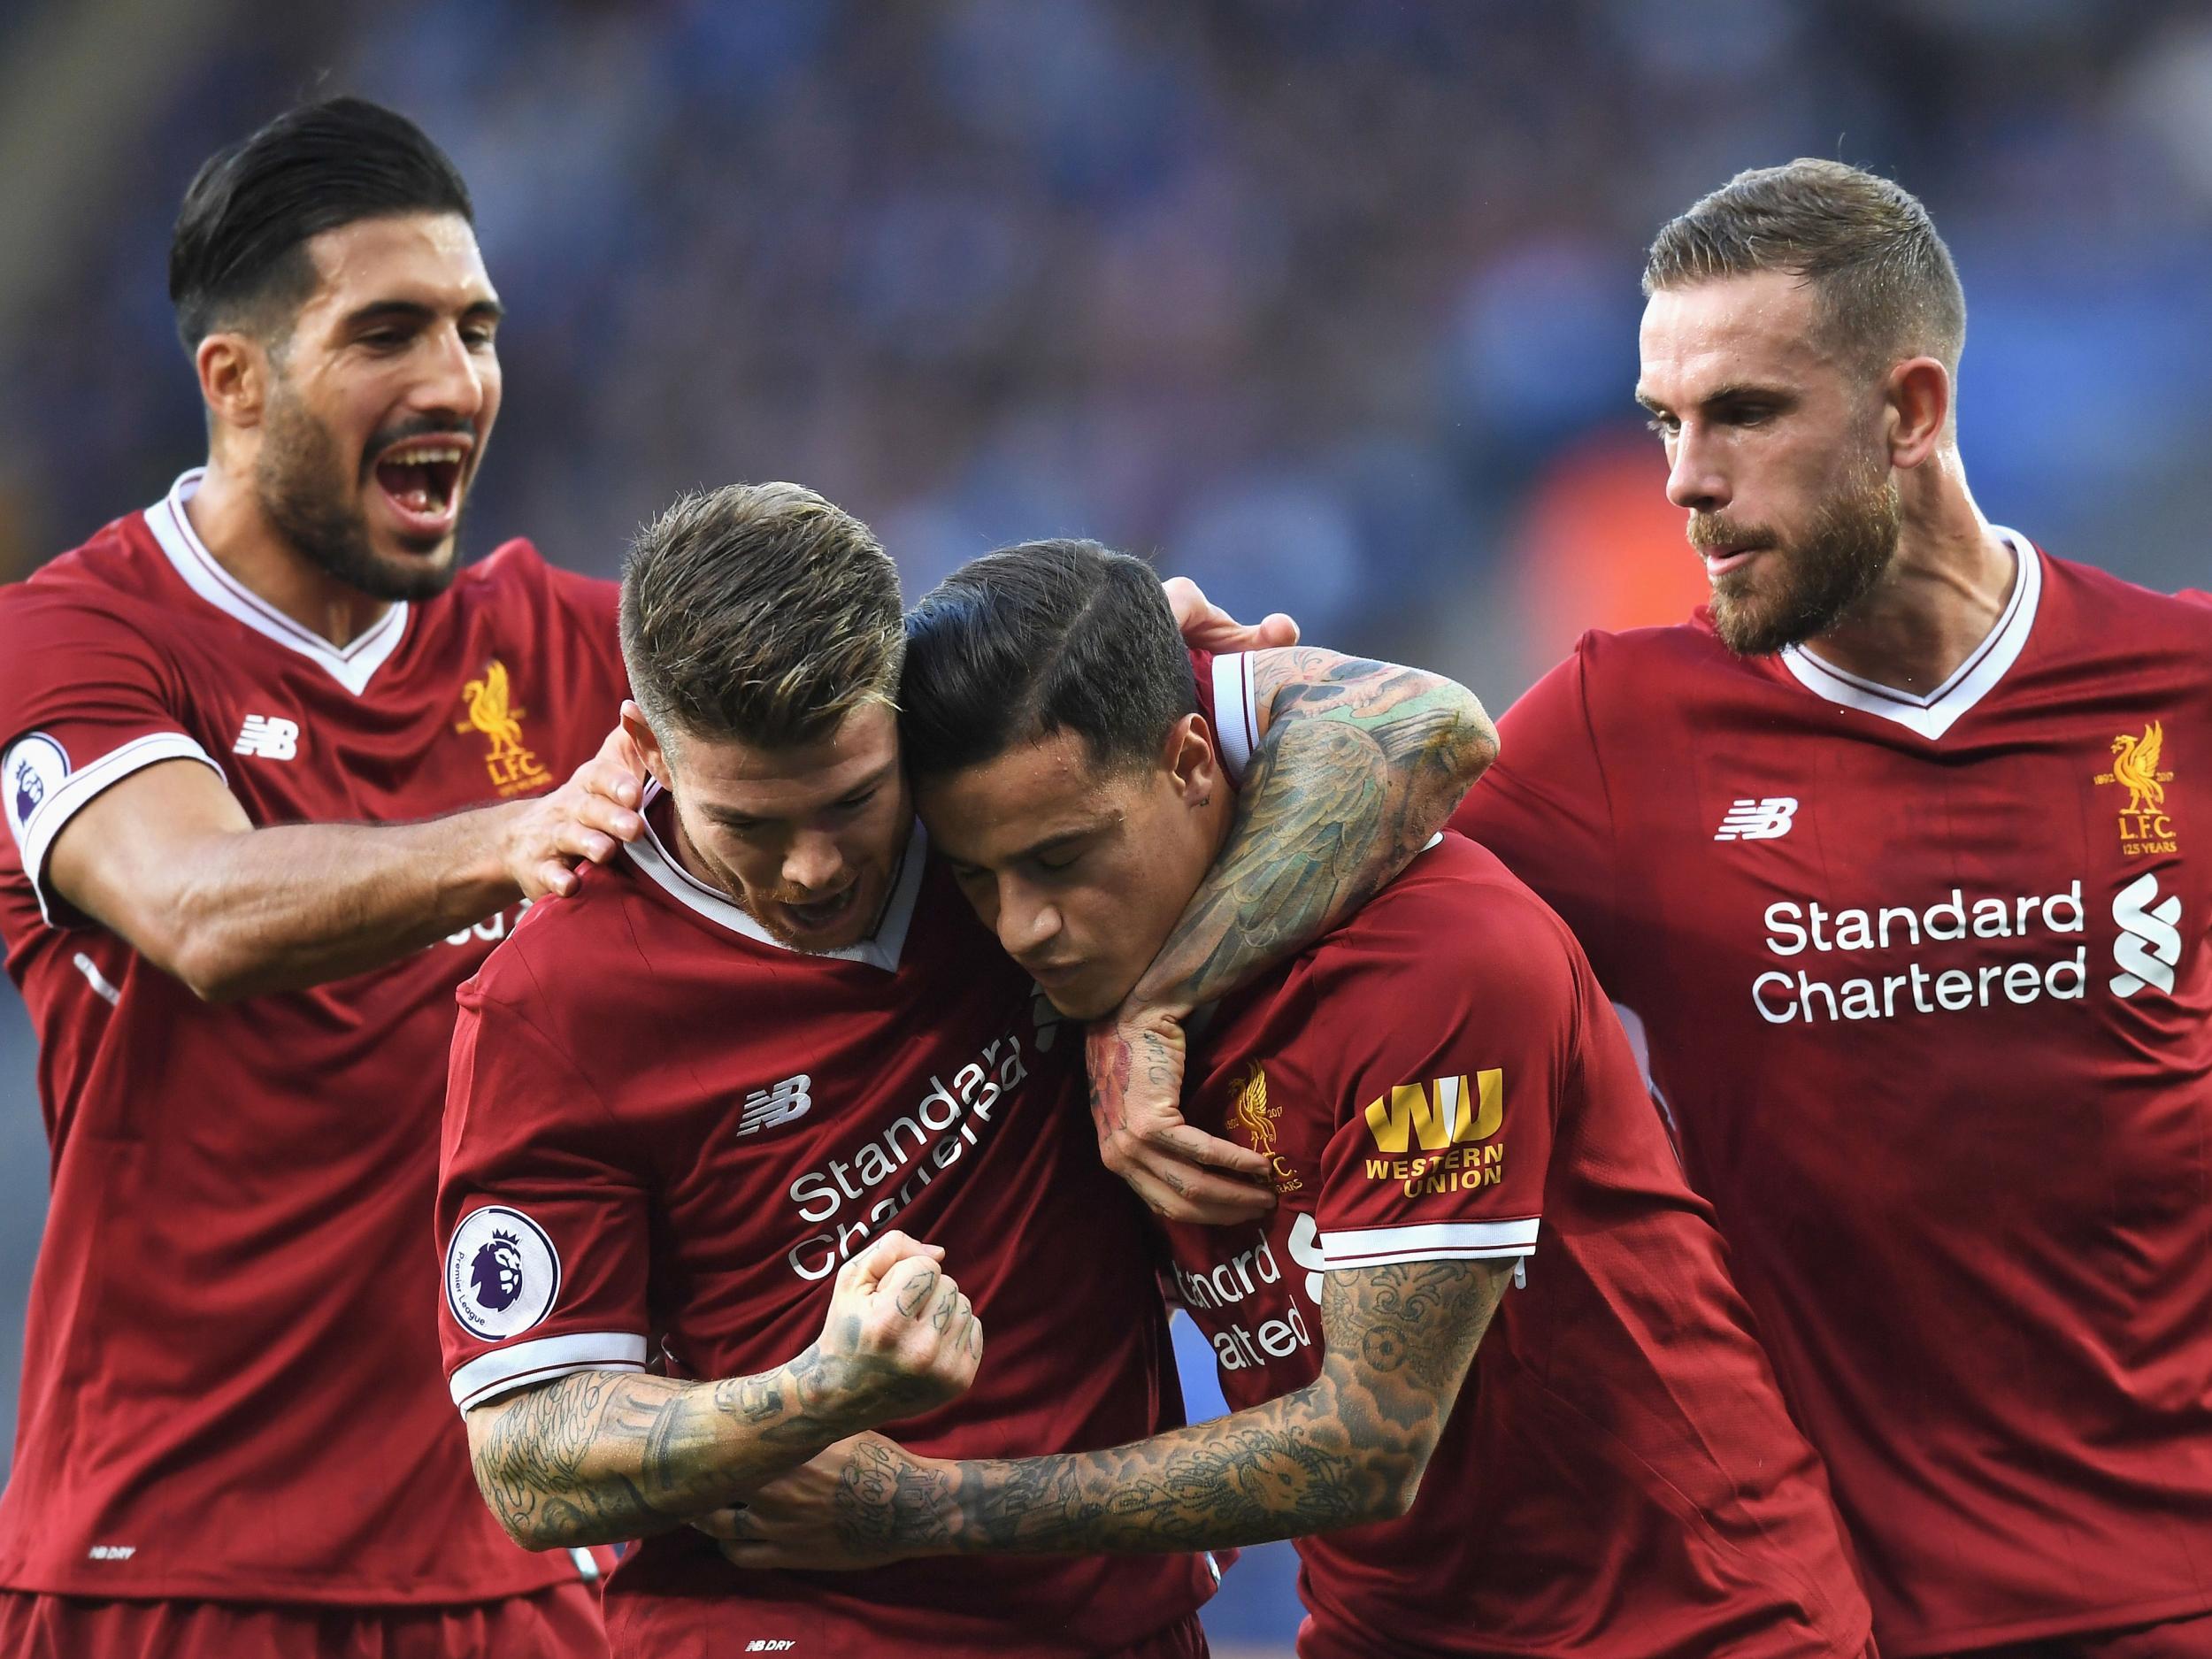 Liverpool have been involved in several tight and high-scoring games this season